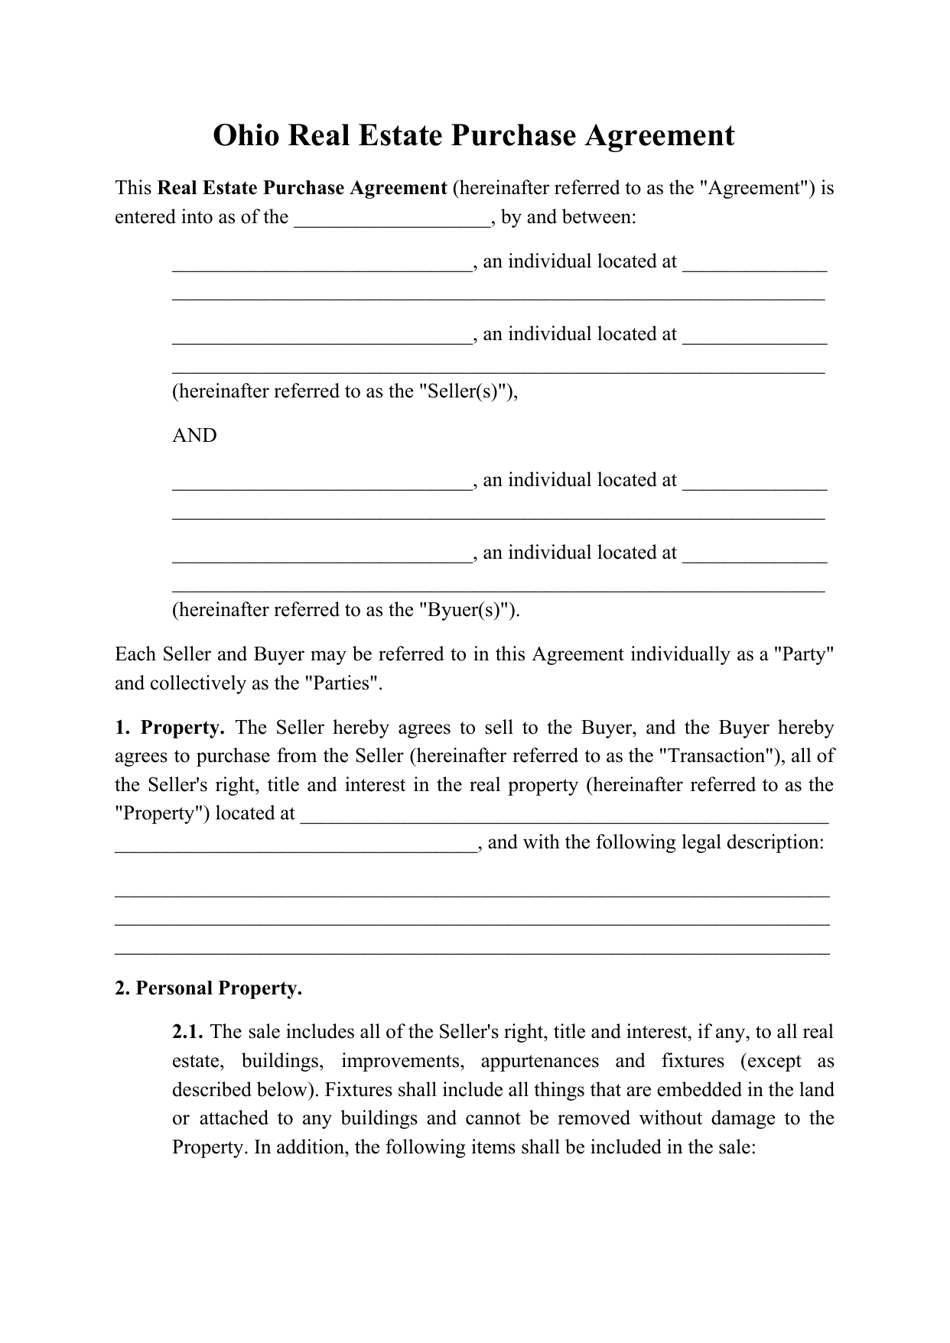 ohio-real-estate-purchase-agreement-template-fill-out-sign-online-and-download-pdf